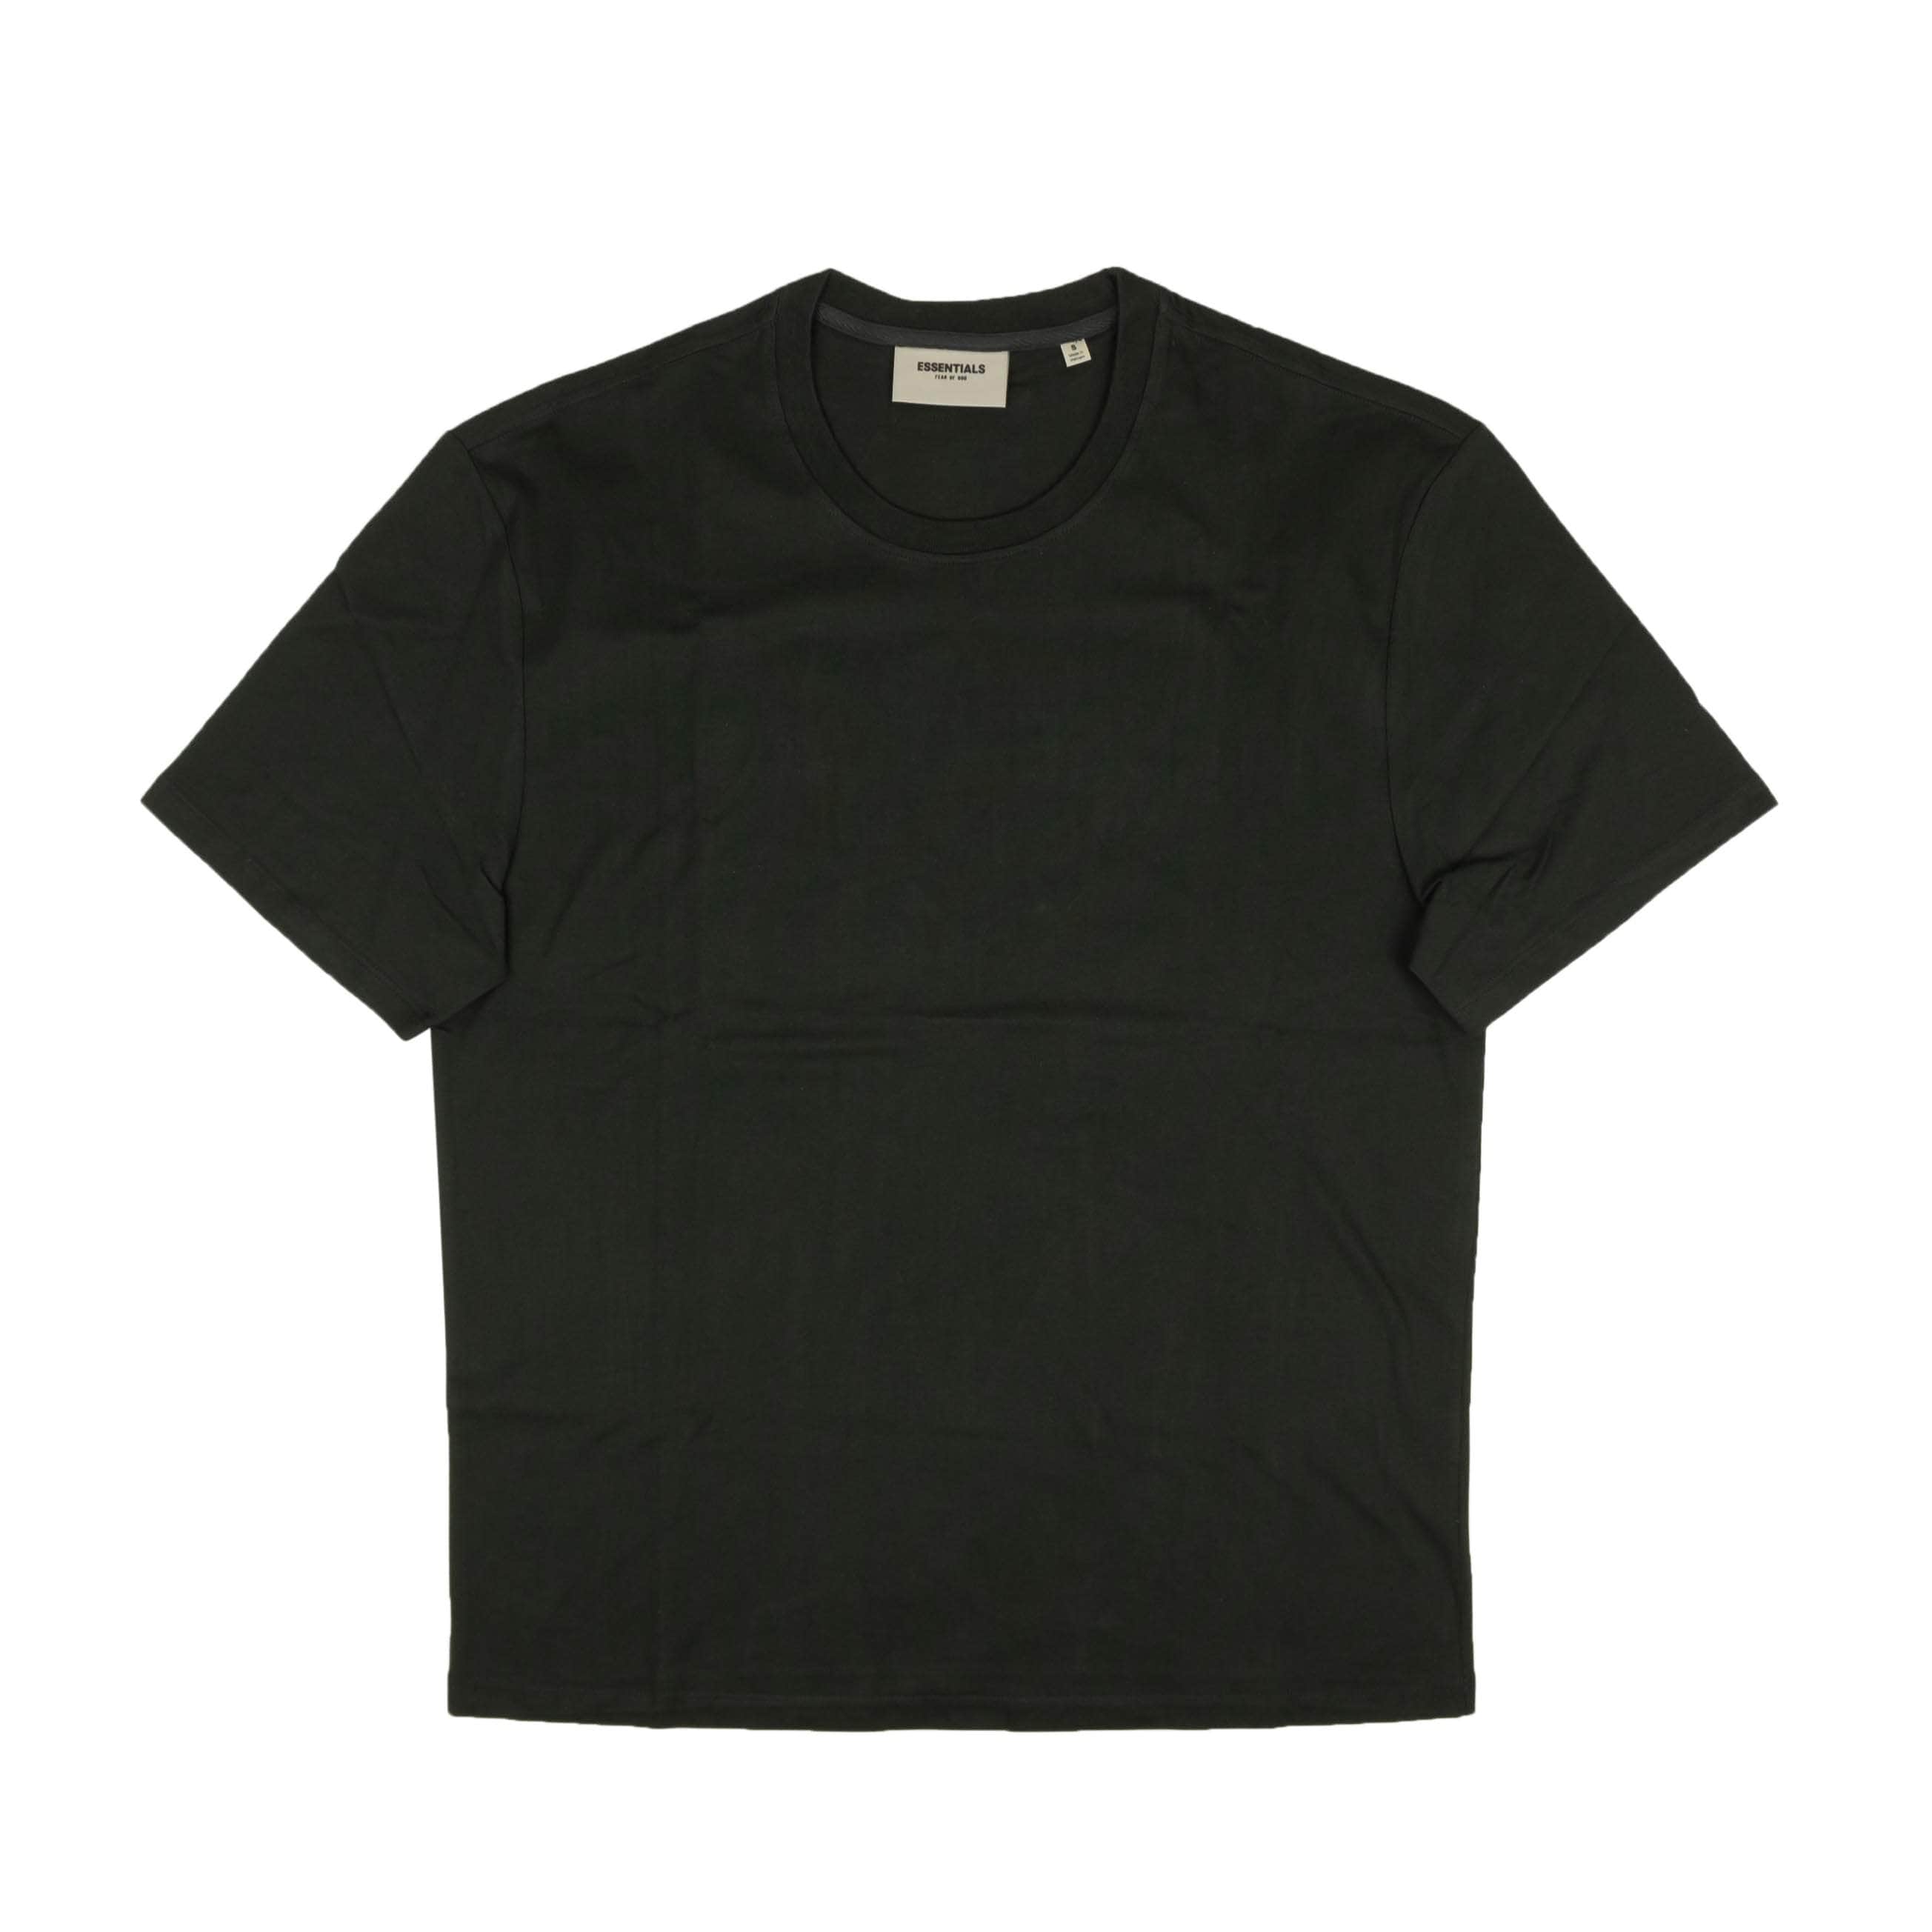 FEAR OF GOD ESSENTIALS couponcollection, essentials-x-fear-of-god, fear-of-god-essentials, gender-mens, main-clothing, mens-shoes, size-l, size-m, size-s, size-xs, under-250 Black Short Sleeve Logo Back T-Shirt